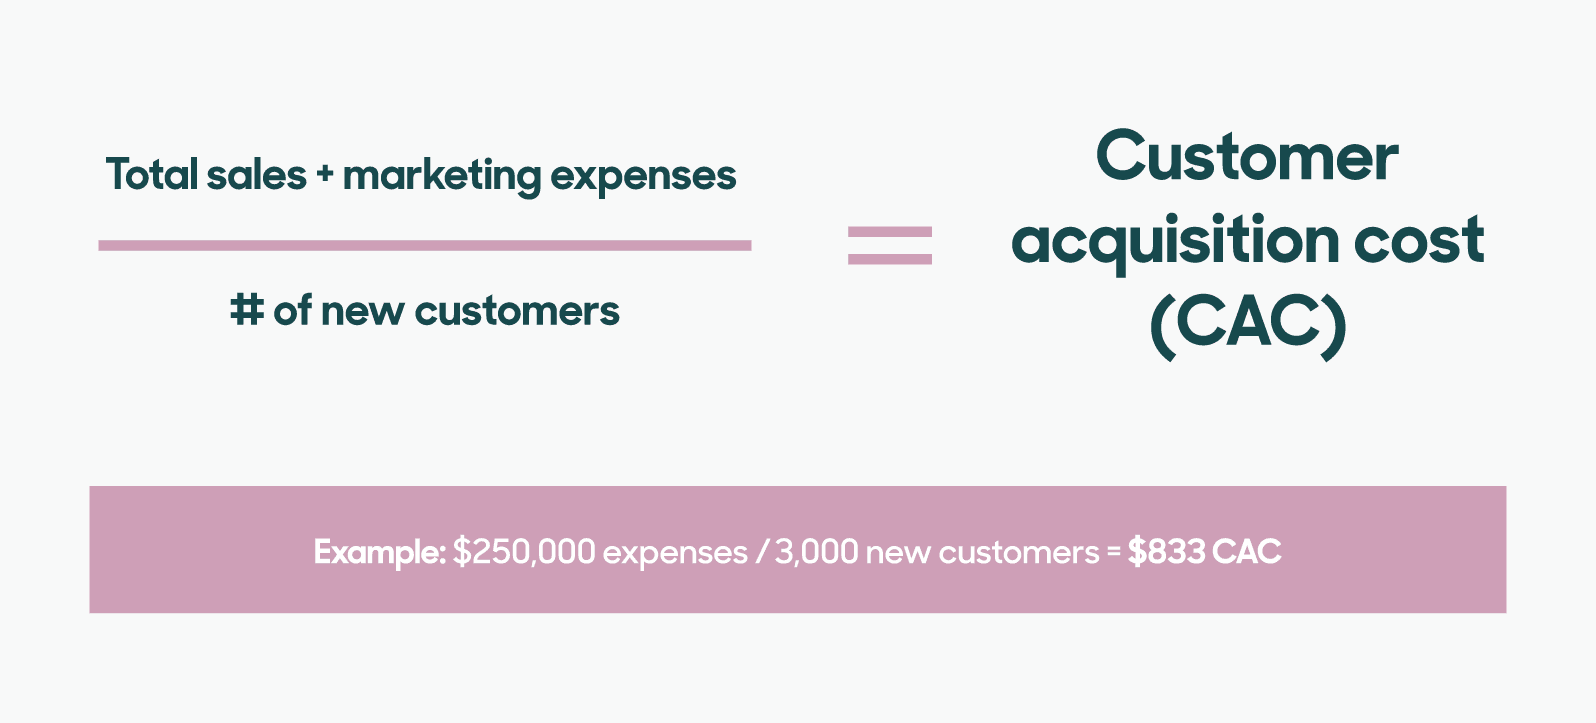 CAC (Customer Acquisition Cost) Formula